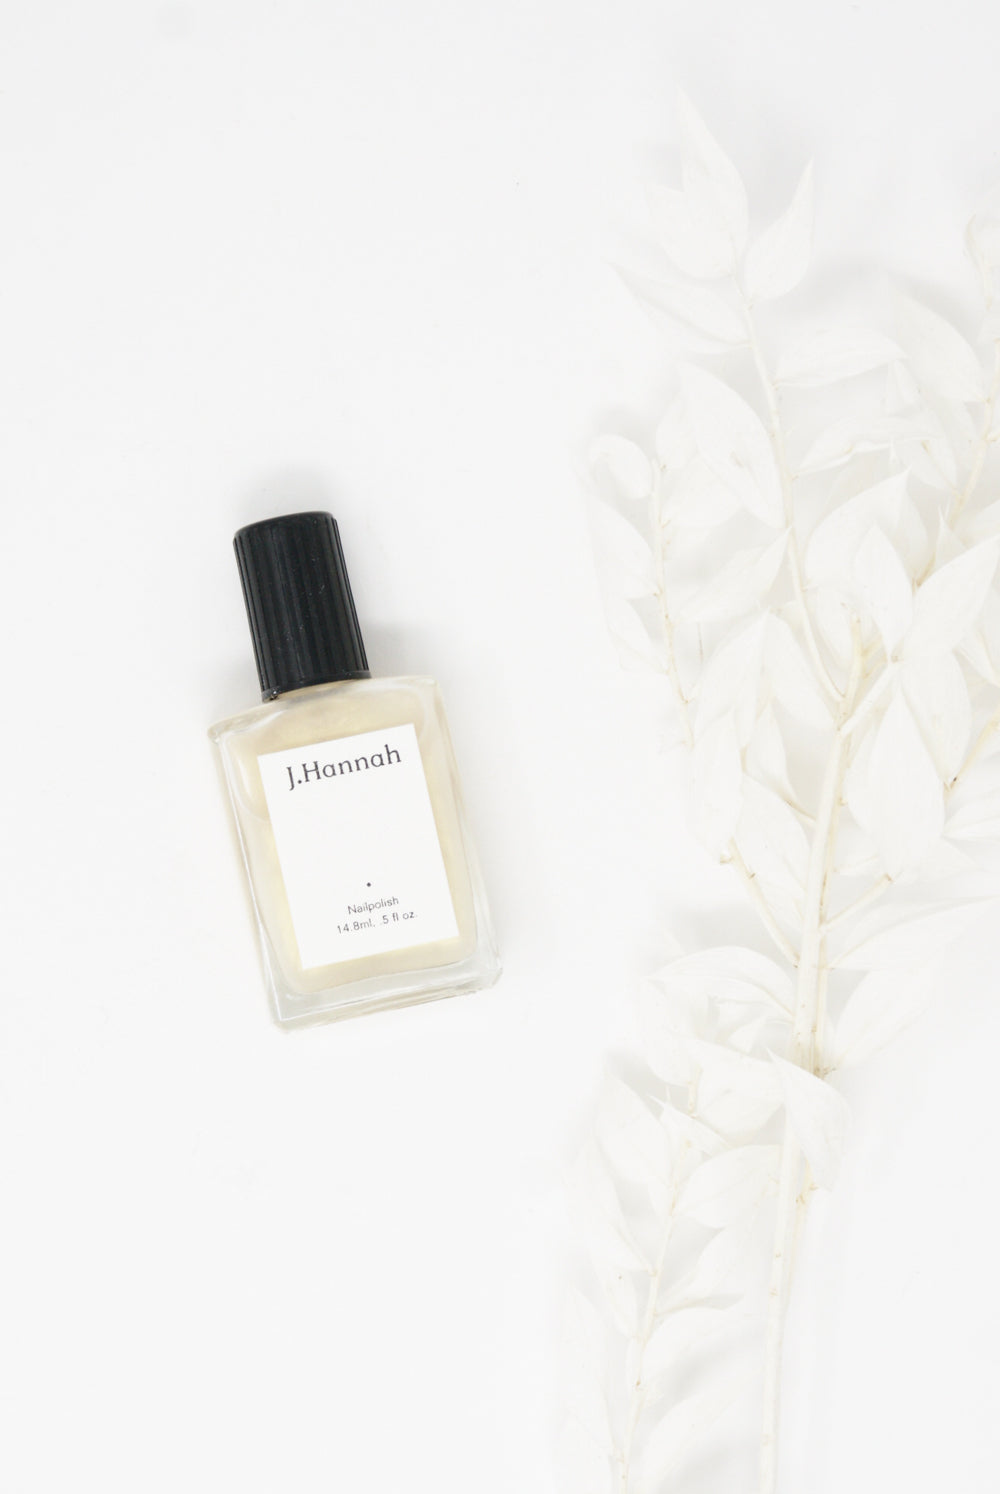 A color-resistant bottle of J Hannah Nail Polish in Akoya sitting on a white surface.